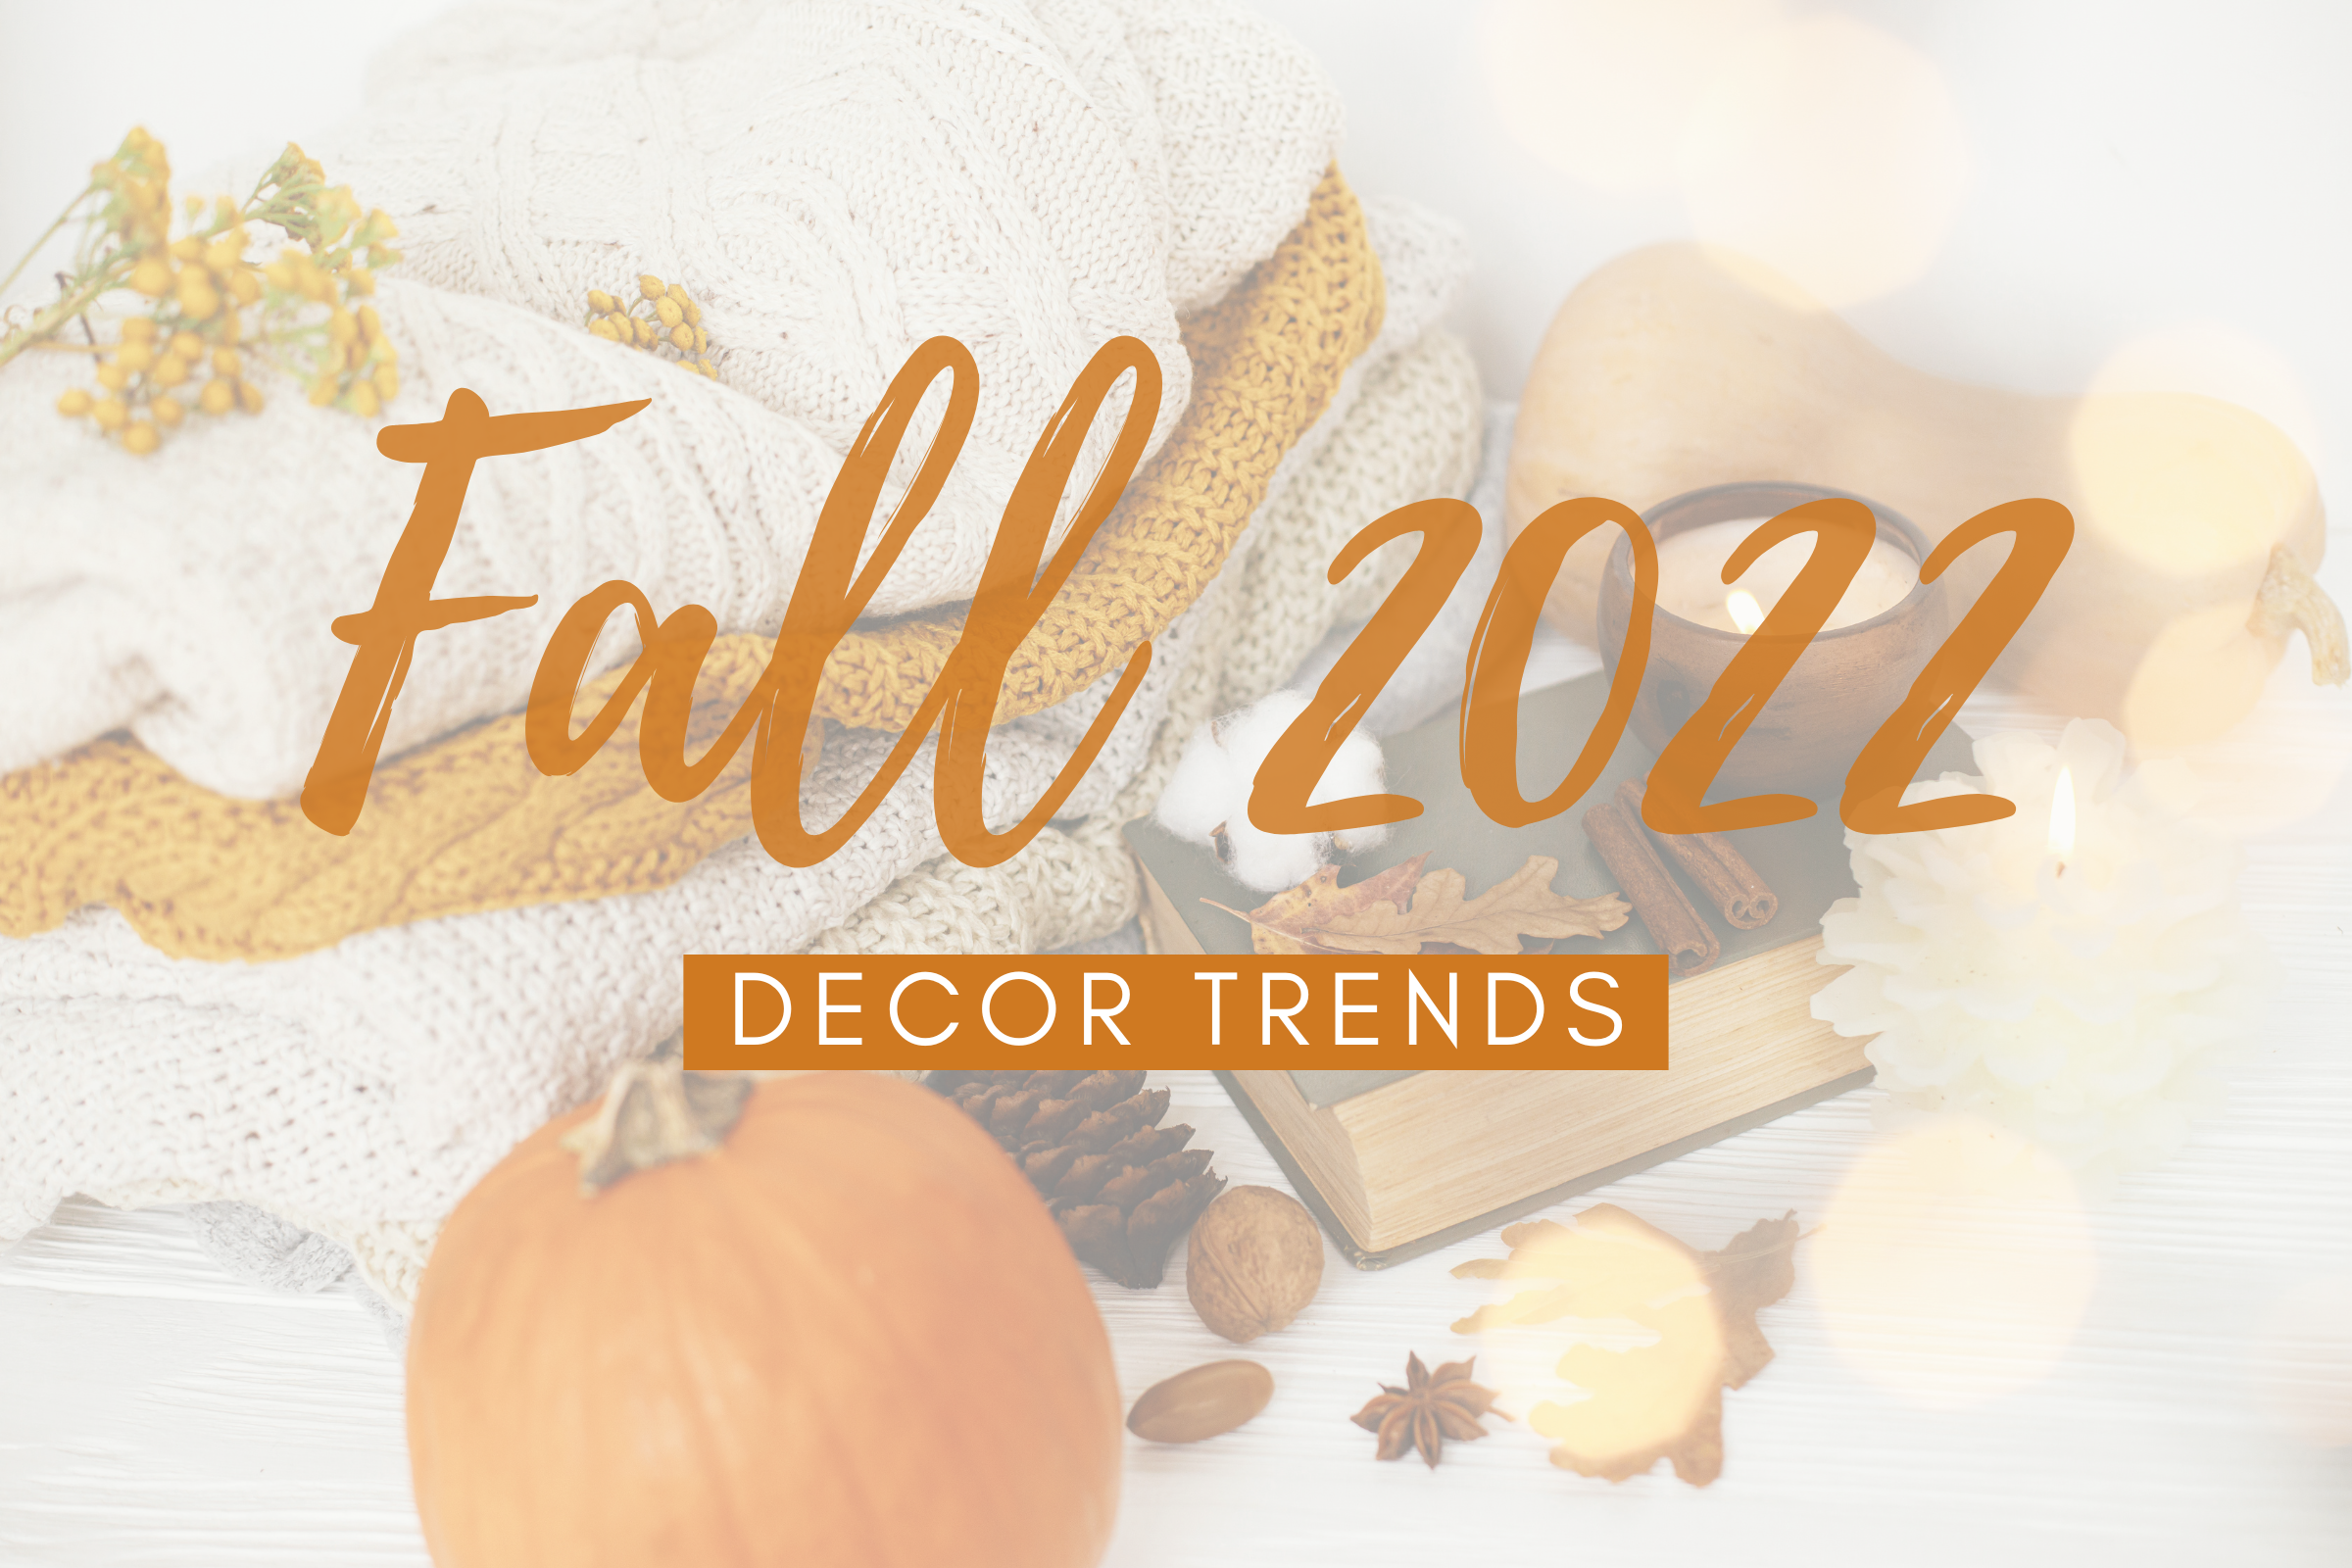 FALL IS COMING! TIME TO FRESHEN YOUR DECOR UP!